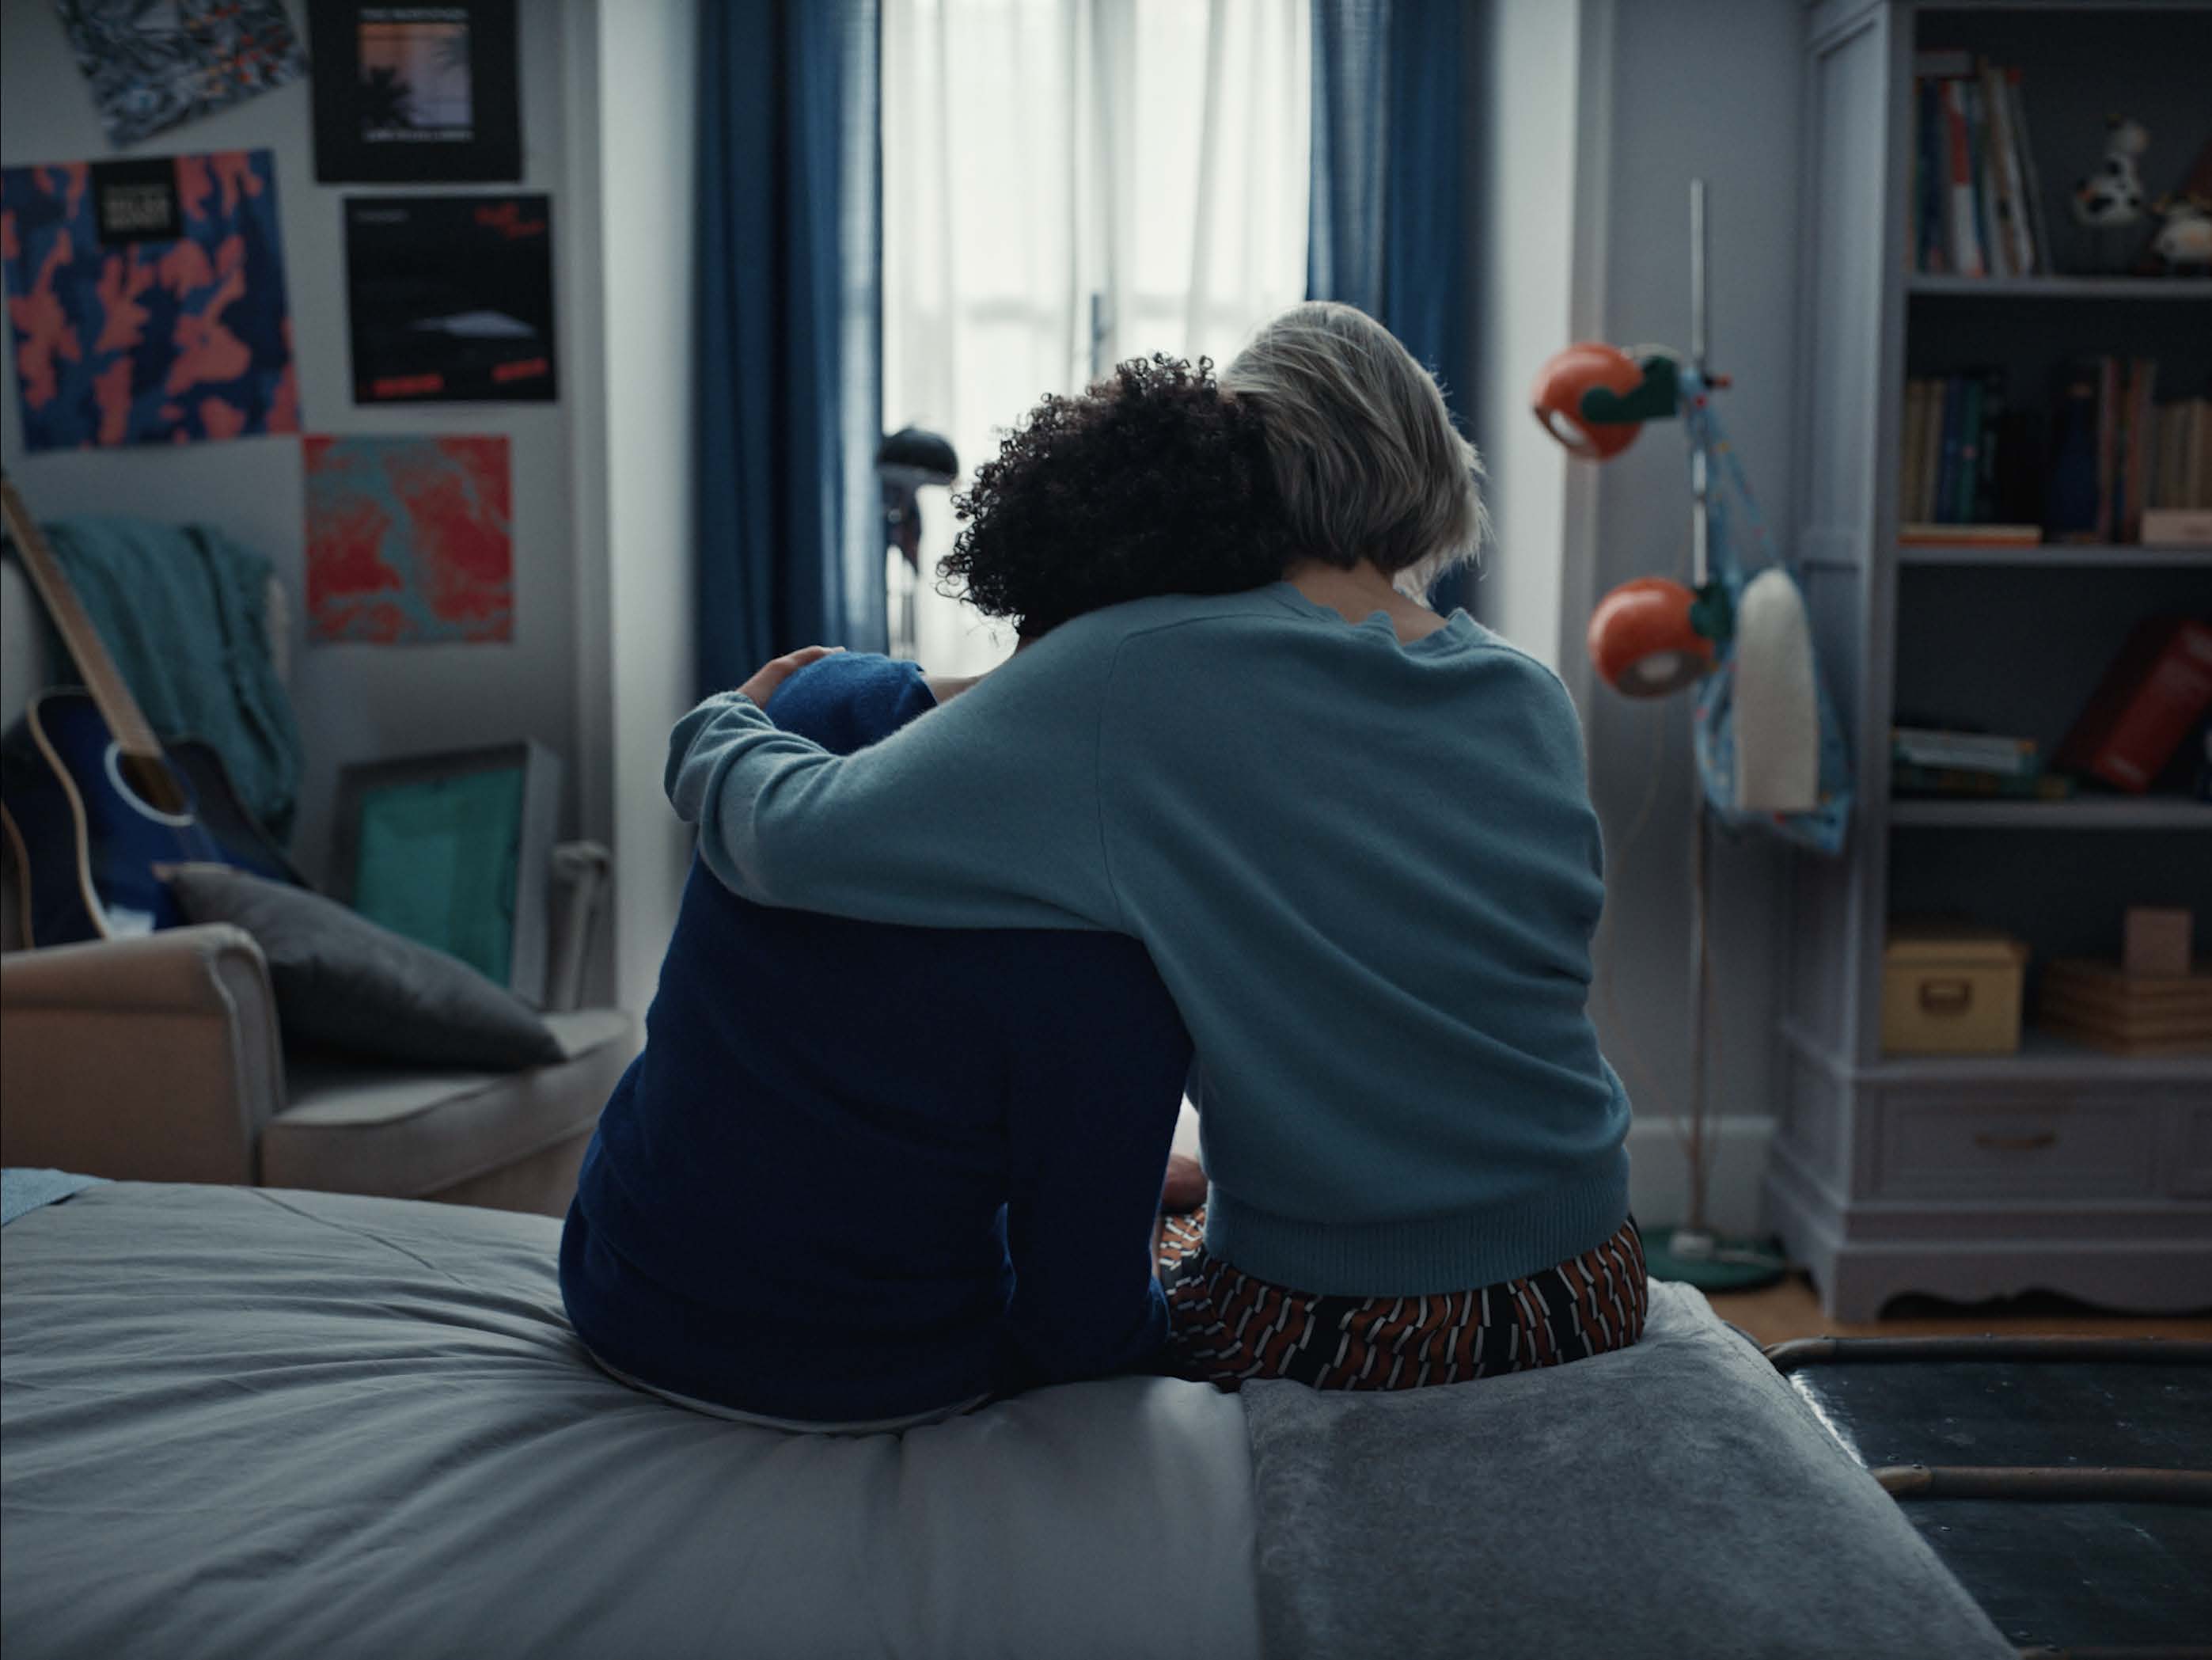 HunkyDory's Sune Sorensen Directs Emotional Mother’s Day Brand Film For Nivea